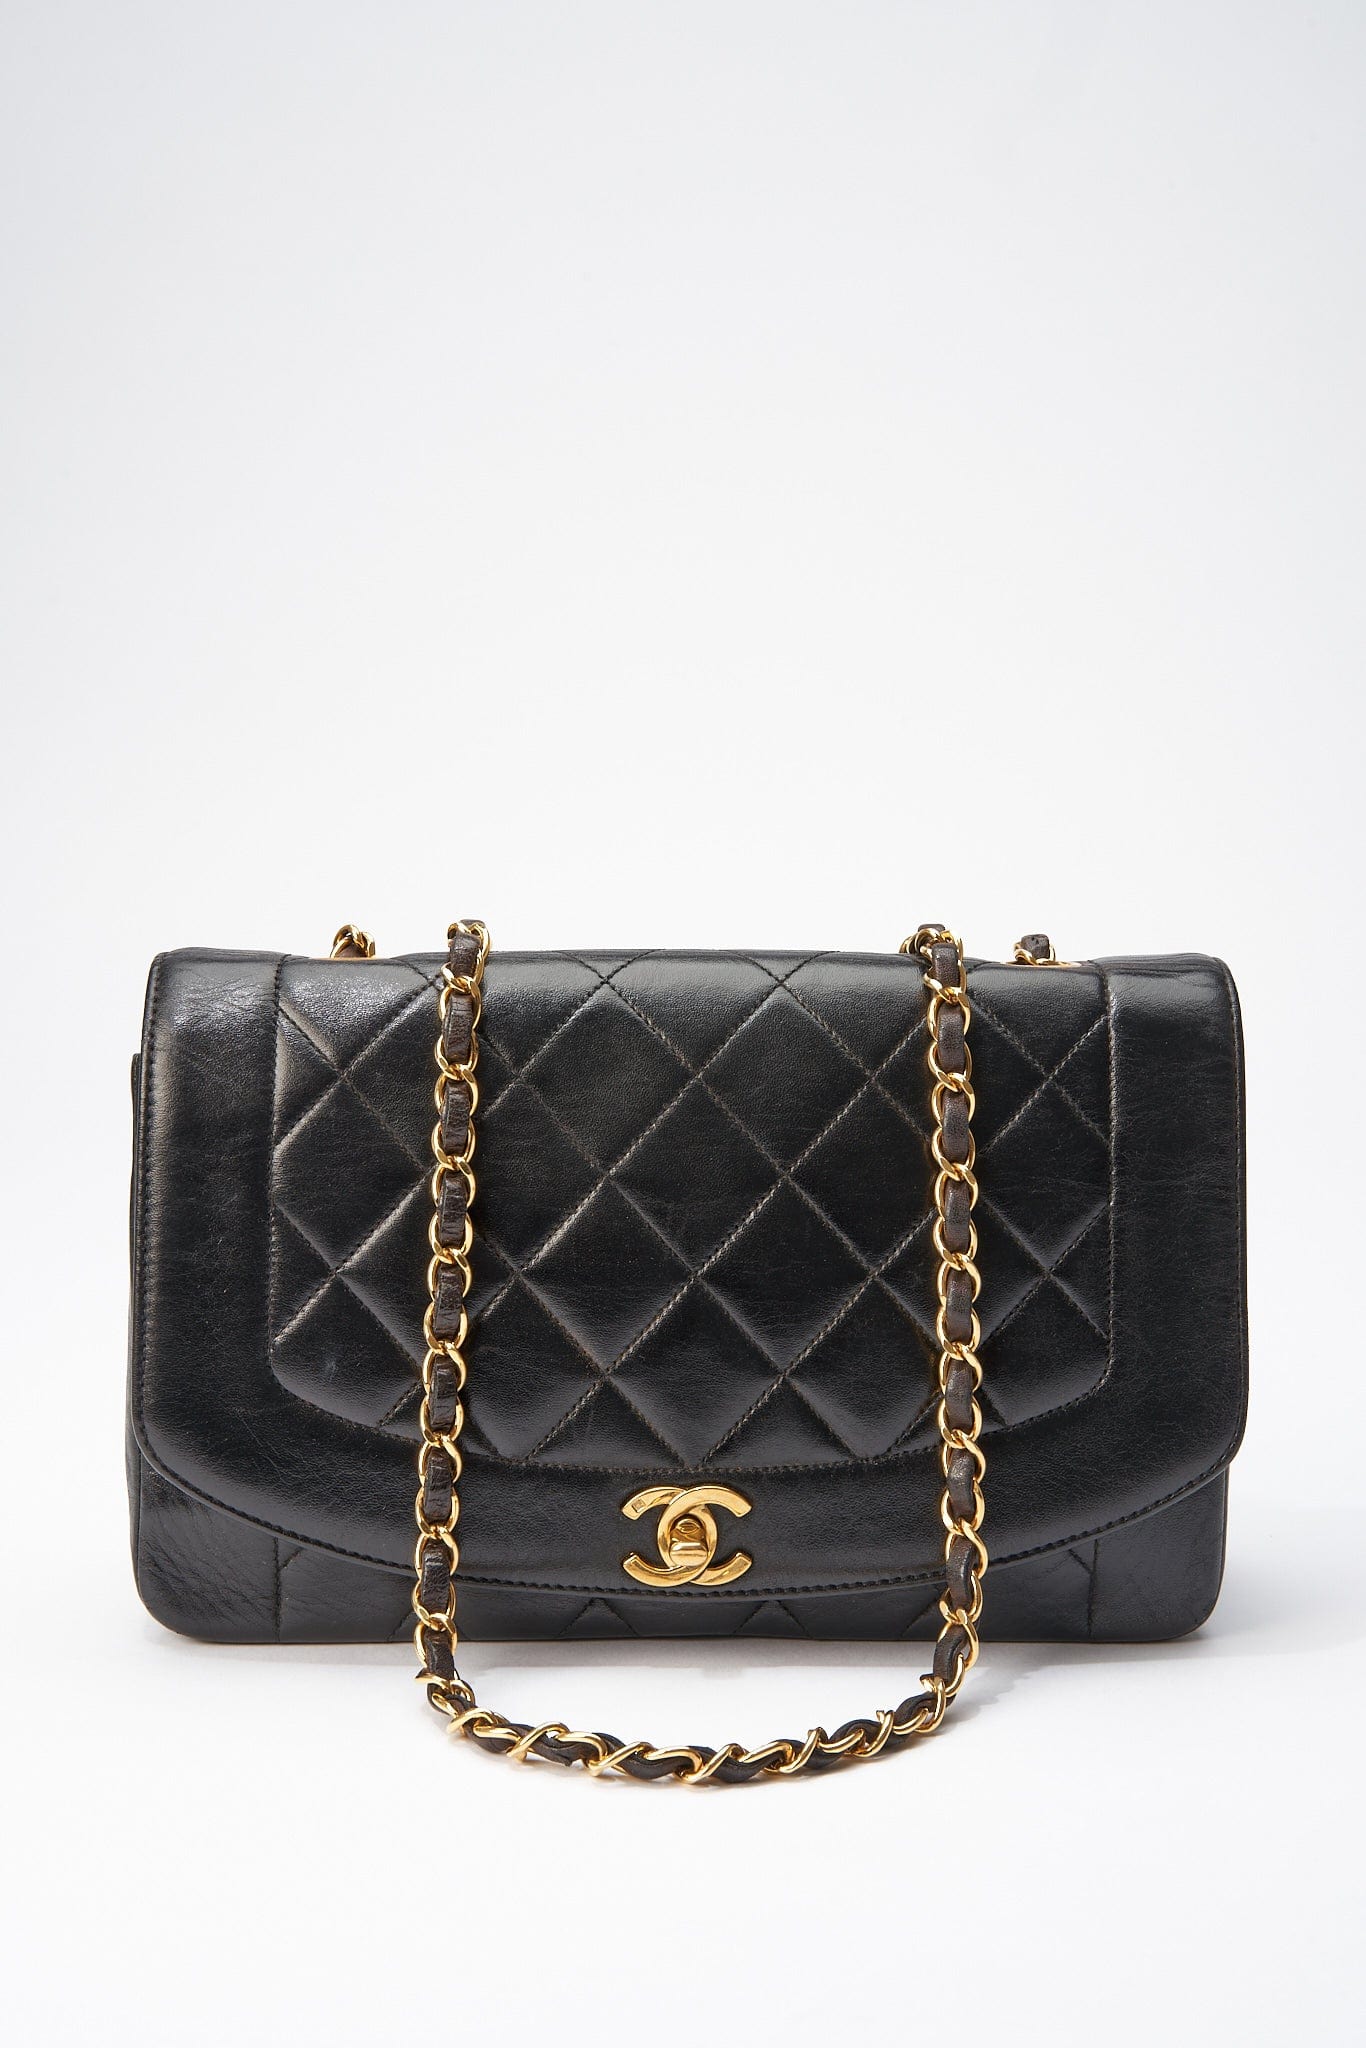 Vintage Chanel Diana Black Single Flap with 24k gold plated